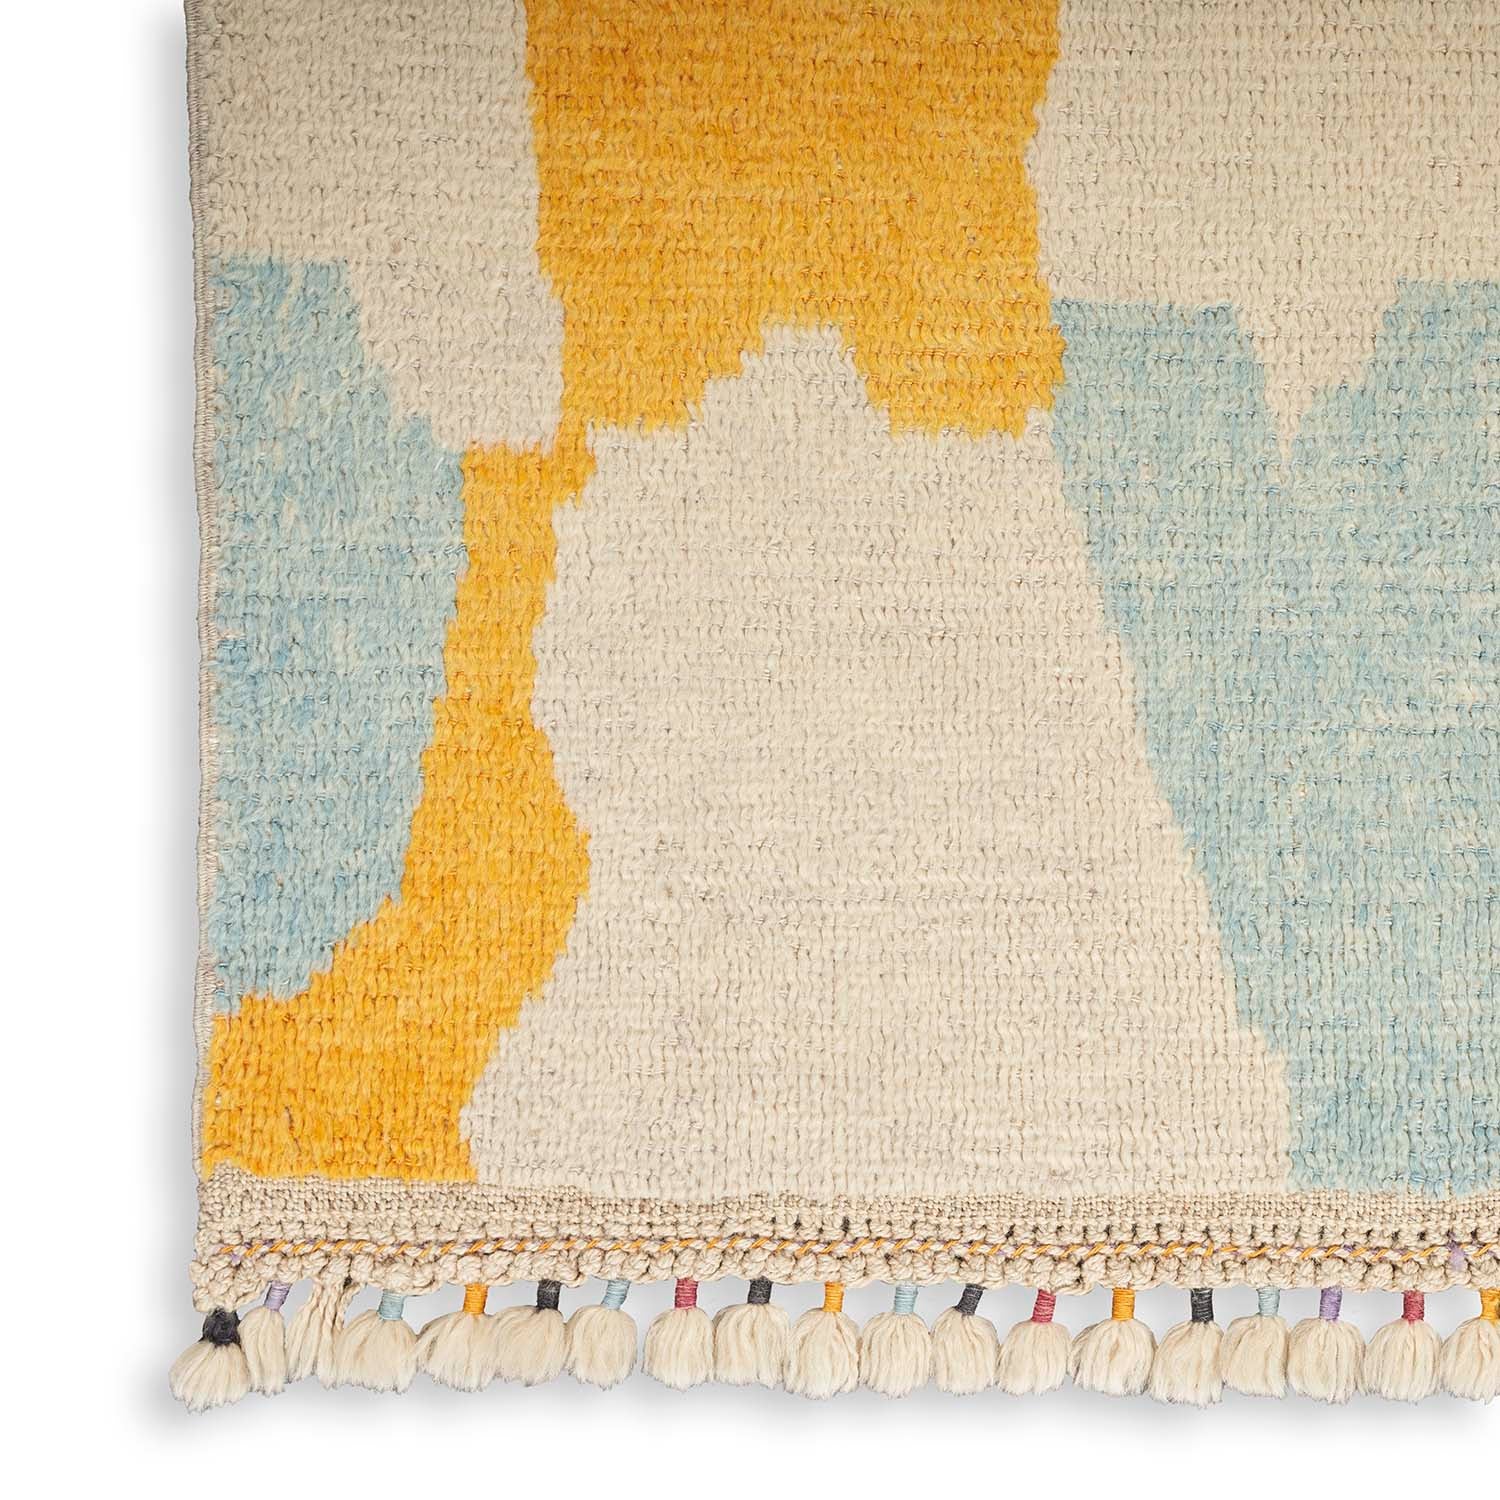 Abstract patterned woven textile with plush tufted construction and eclectic fringe.